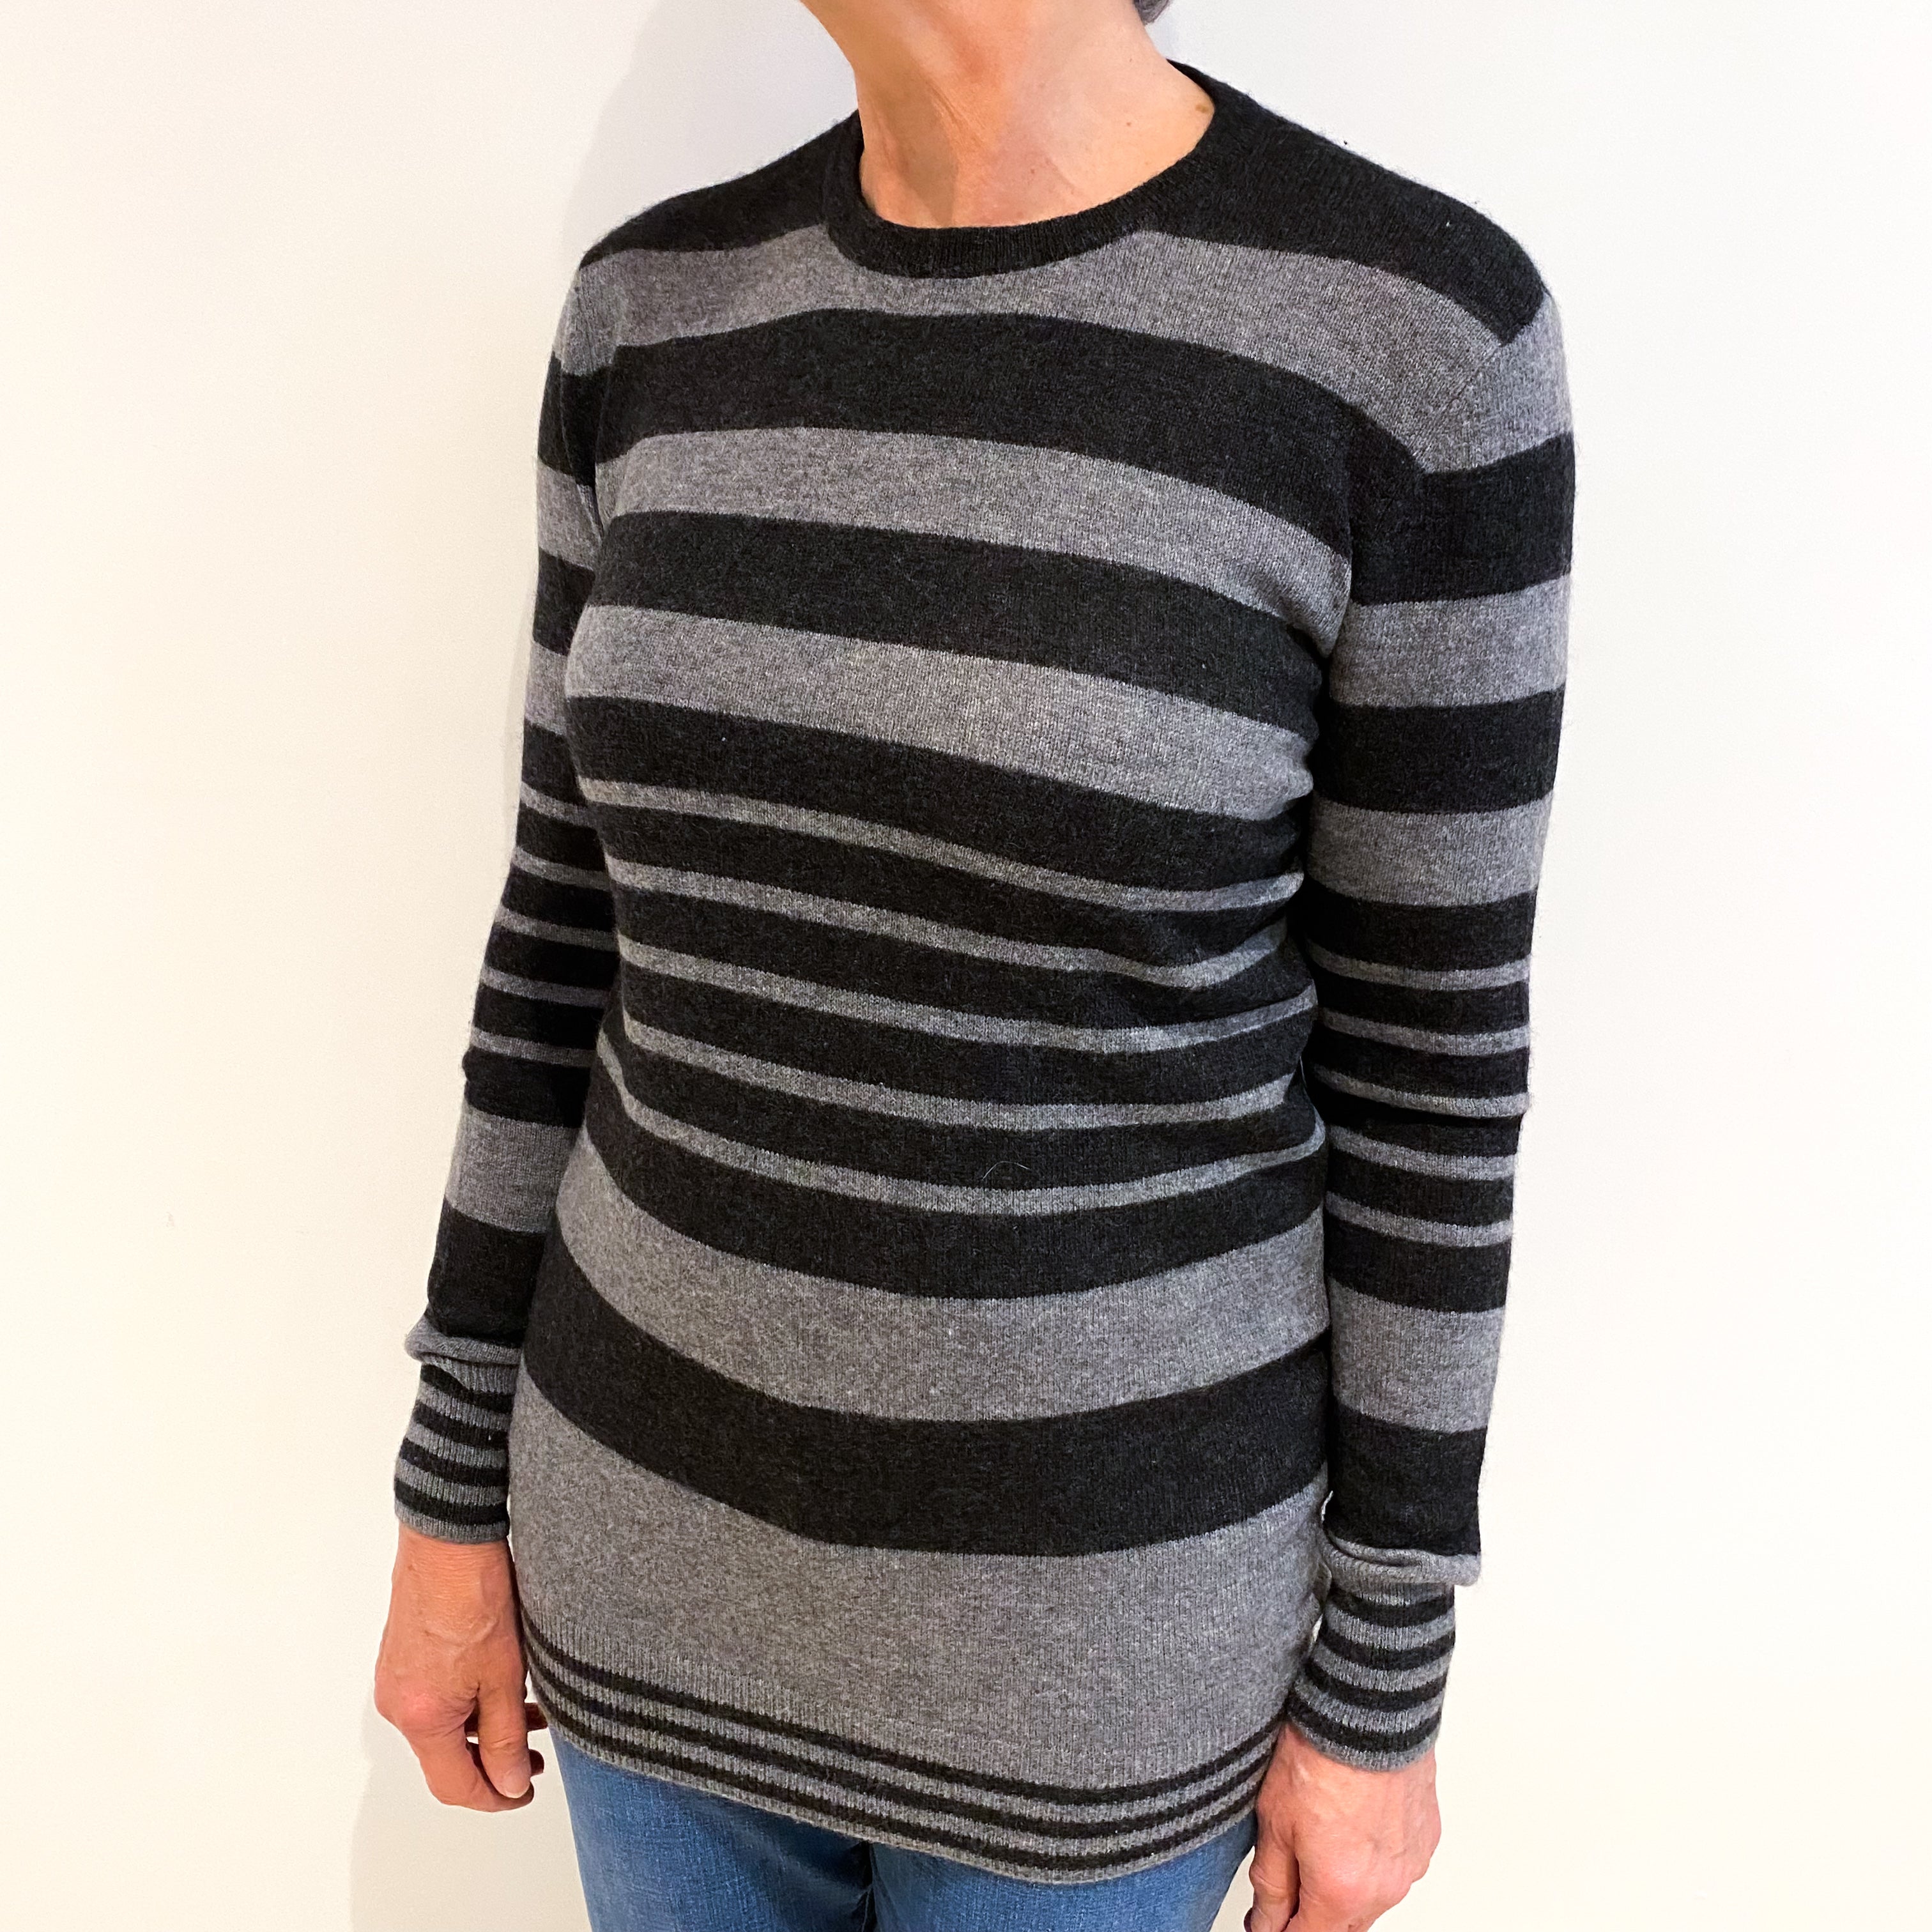 Charcoal And Slate Grey Striped Cashmere Crew Neck Jumper Medium